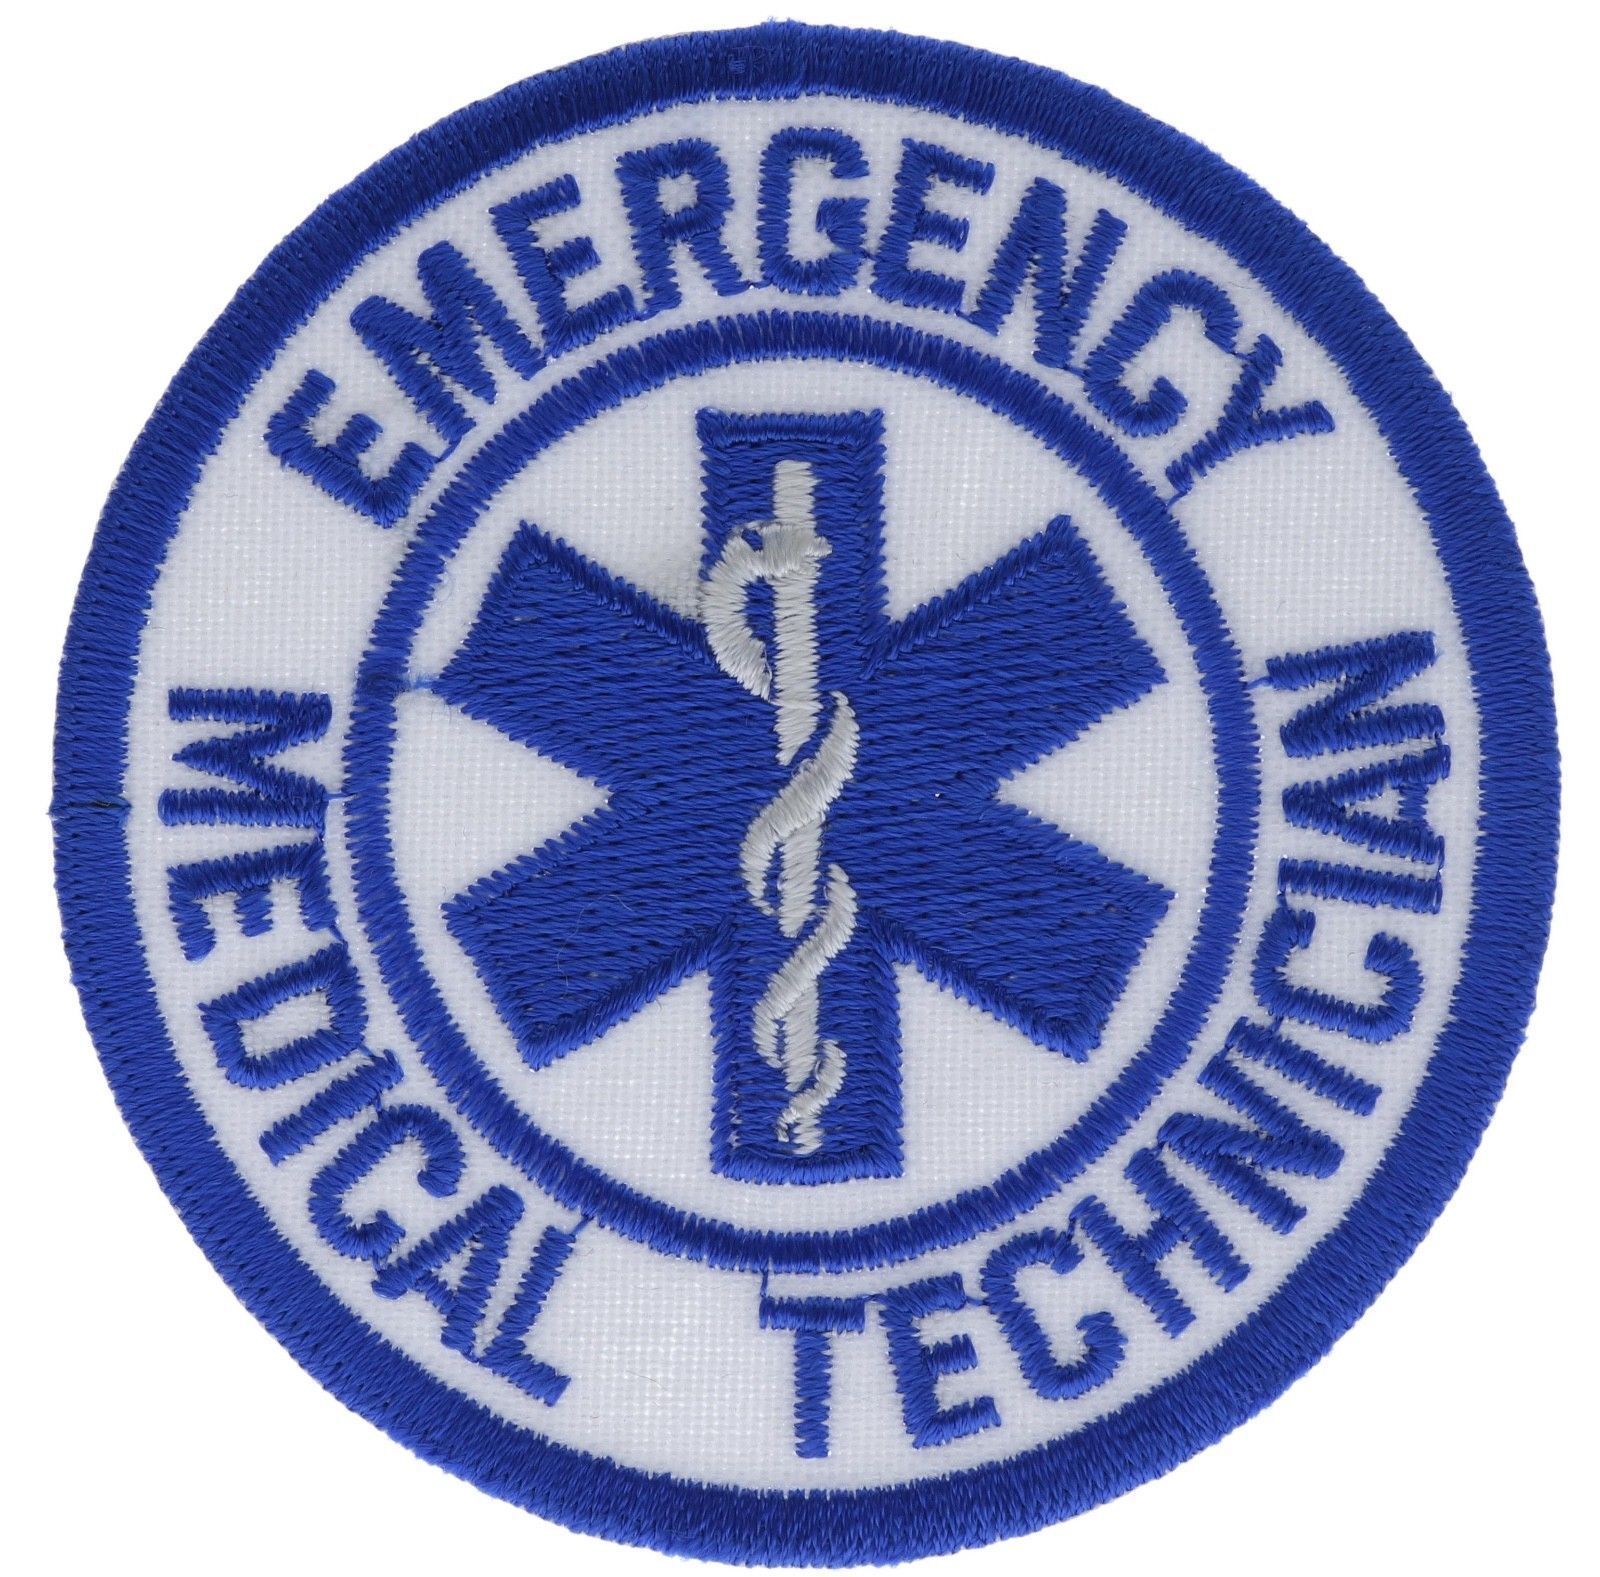 EMT Star of Life Emergency Medical Technician 3.75 inch  Patch PPM F4D35Z